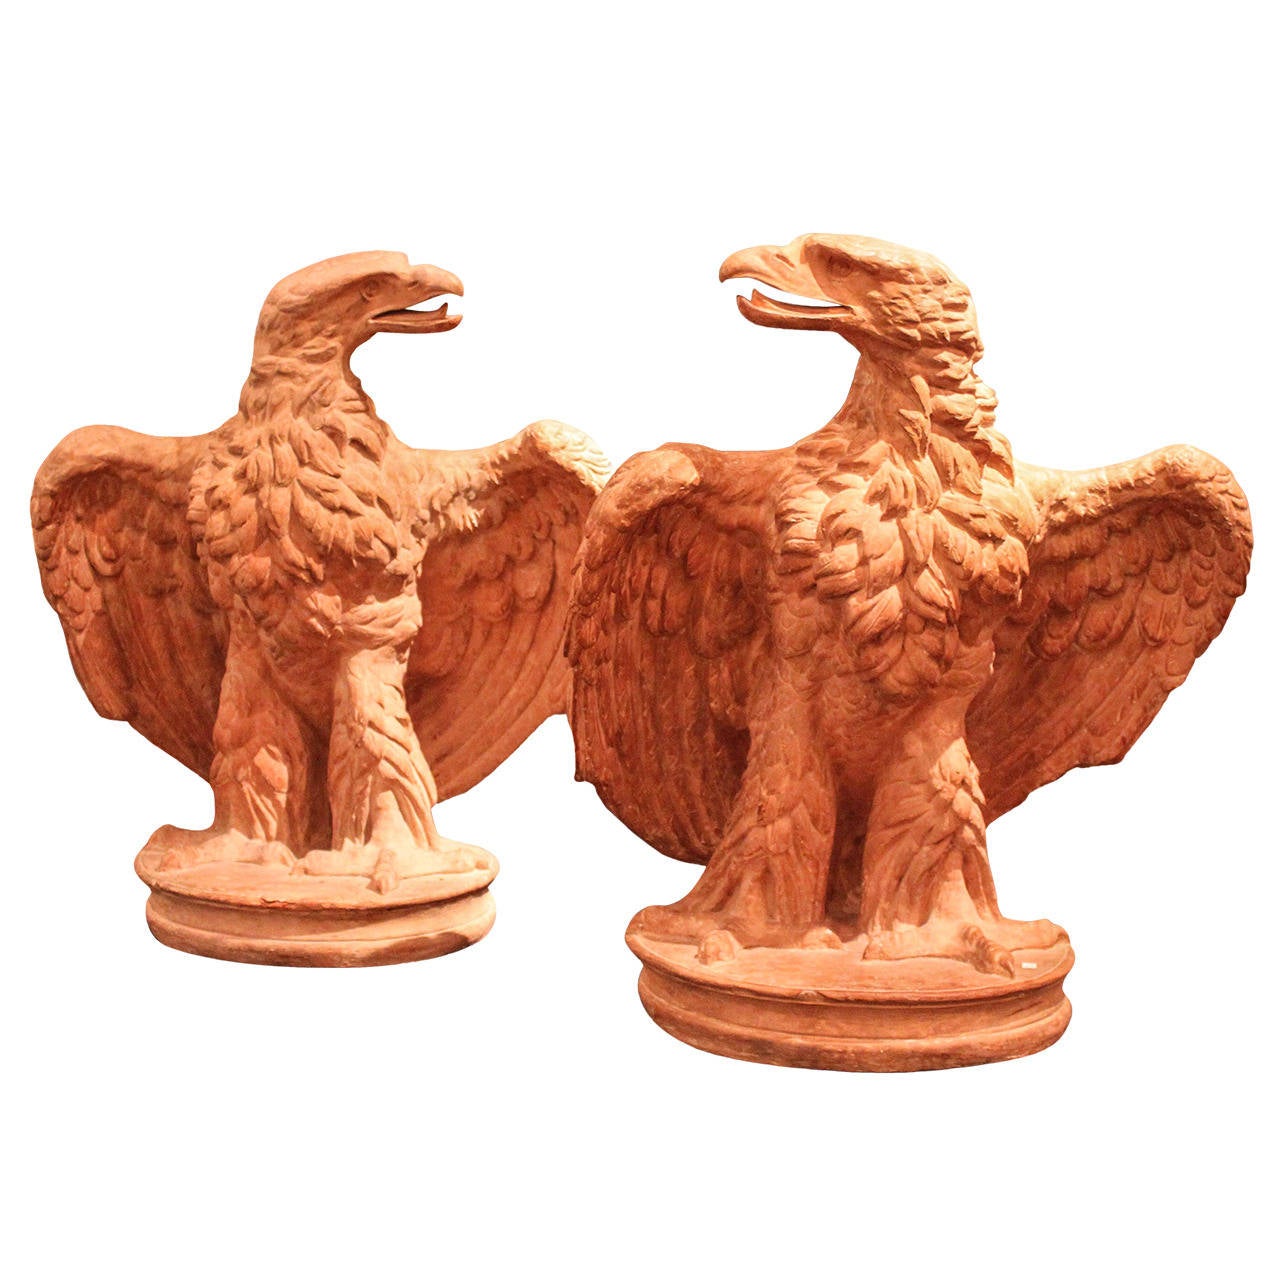 Pair of large-scale terracotta eagles, each facing each other or away and poised to take off while perched on an oval base of the same material. Highly detailed and fully realized from all angles.